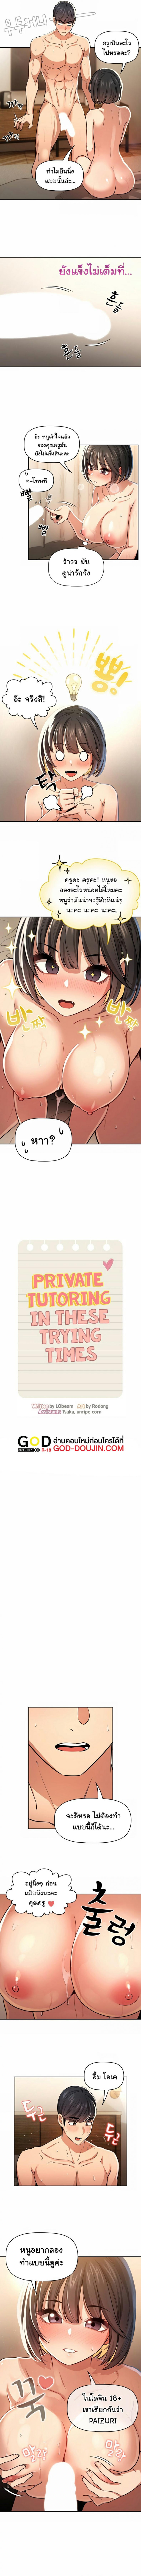 Private Tutoring in These Trying Times 61 2